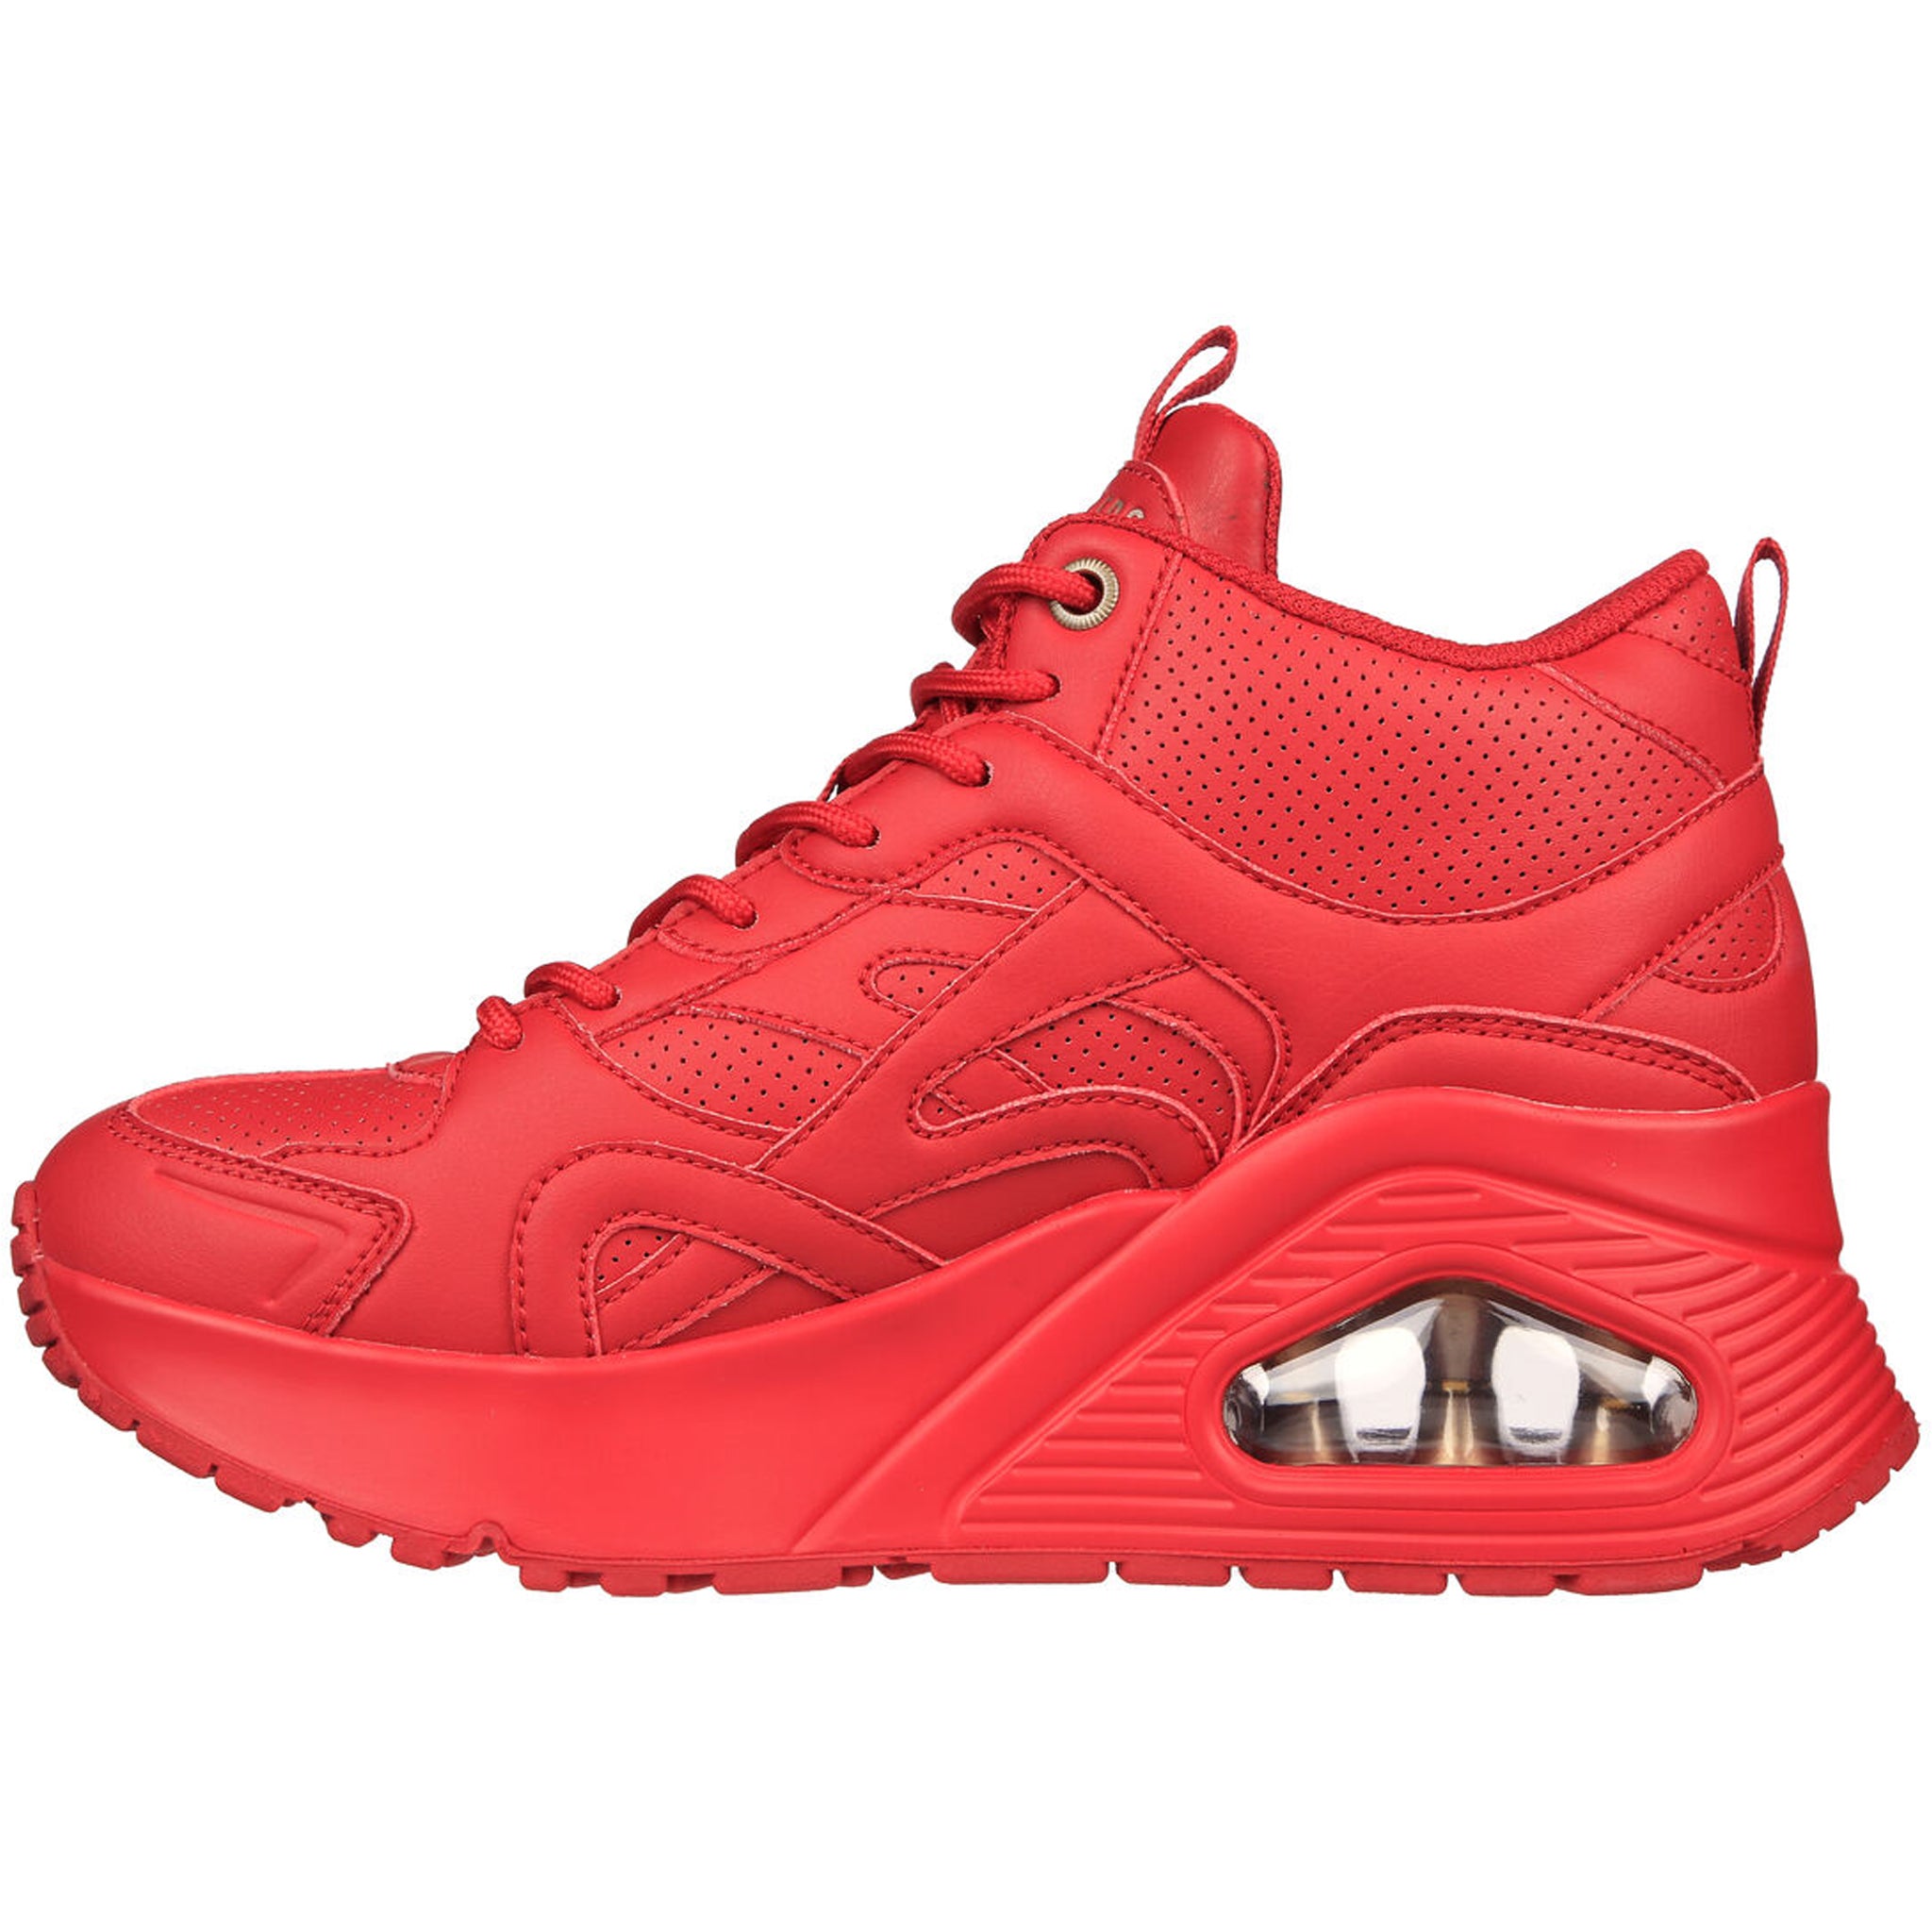 Skechers Women's Uno Hi Her Red Shoes – That Shoe Store and More